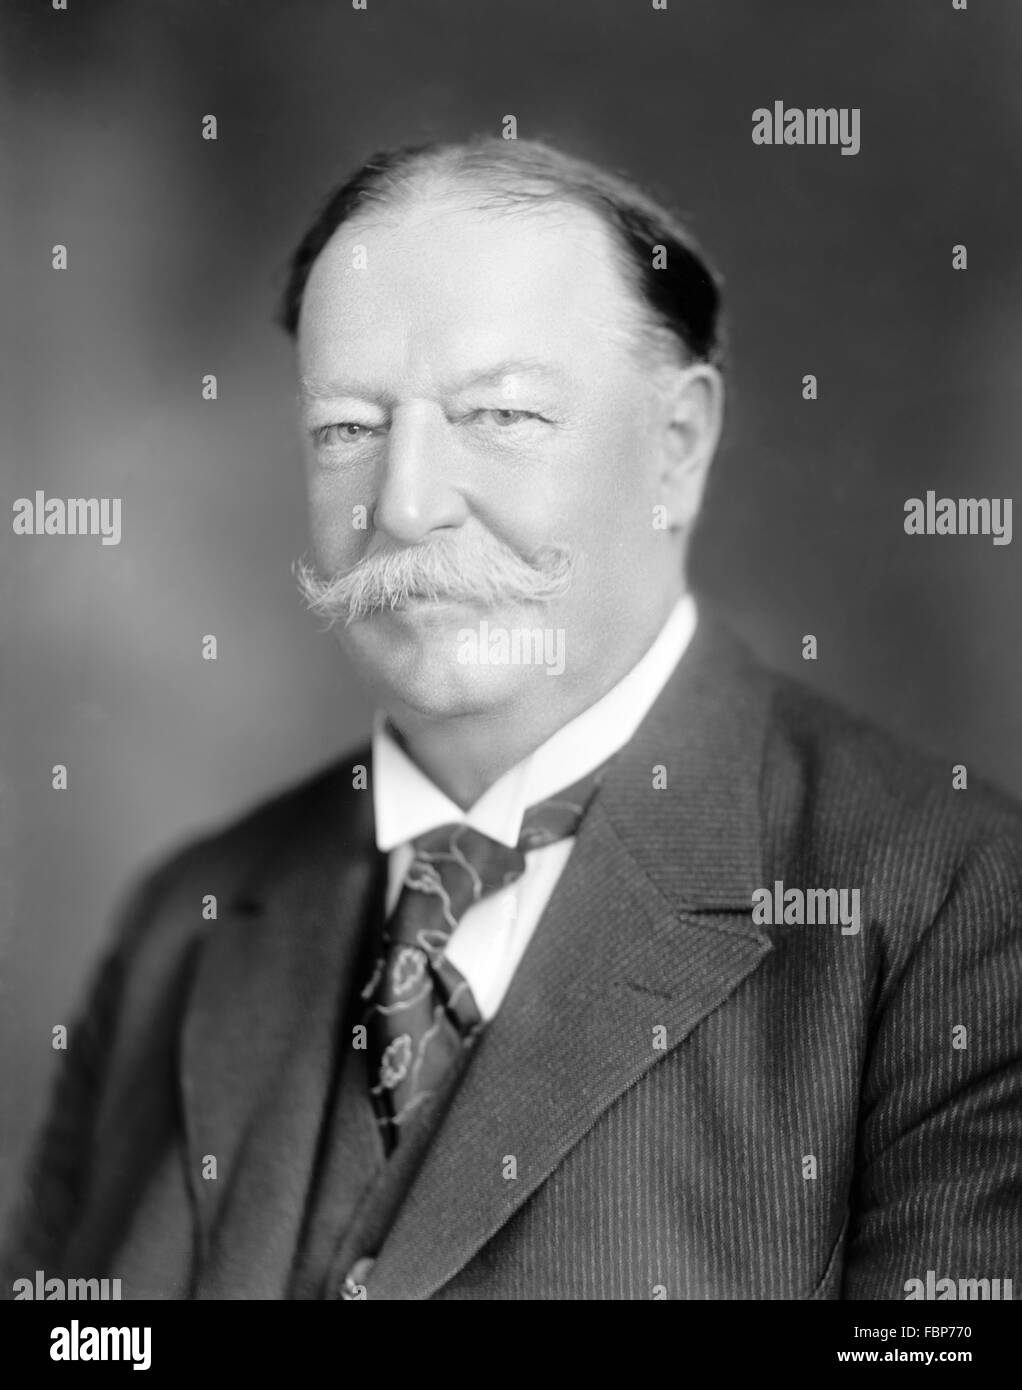 William Howard Taft, portrait of the 27th President of the USA, taken between 1909 and 1930 Stock Photo